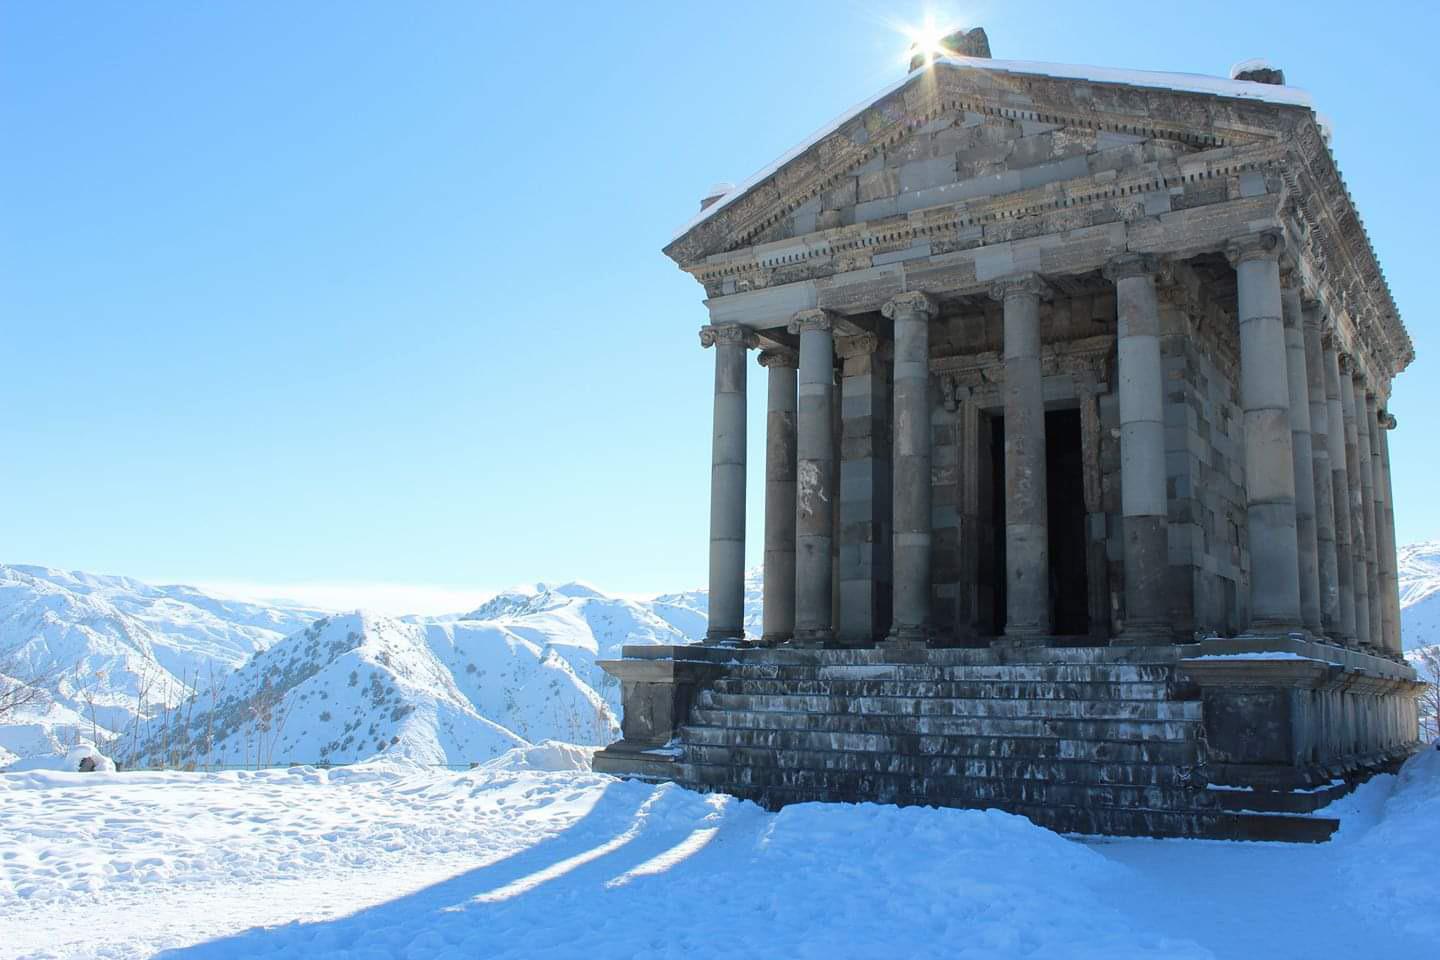 Garni temple in winter. The only standing Greco-Roman Colonnade building in Armenia. 1st century AD.jpg